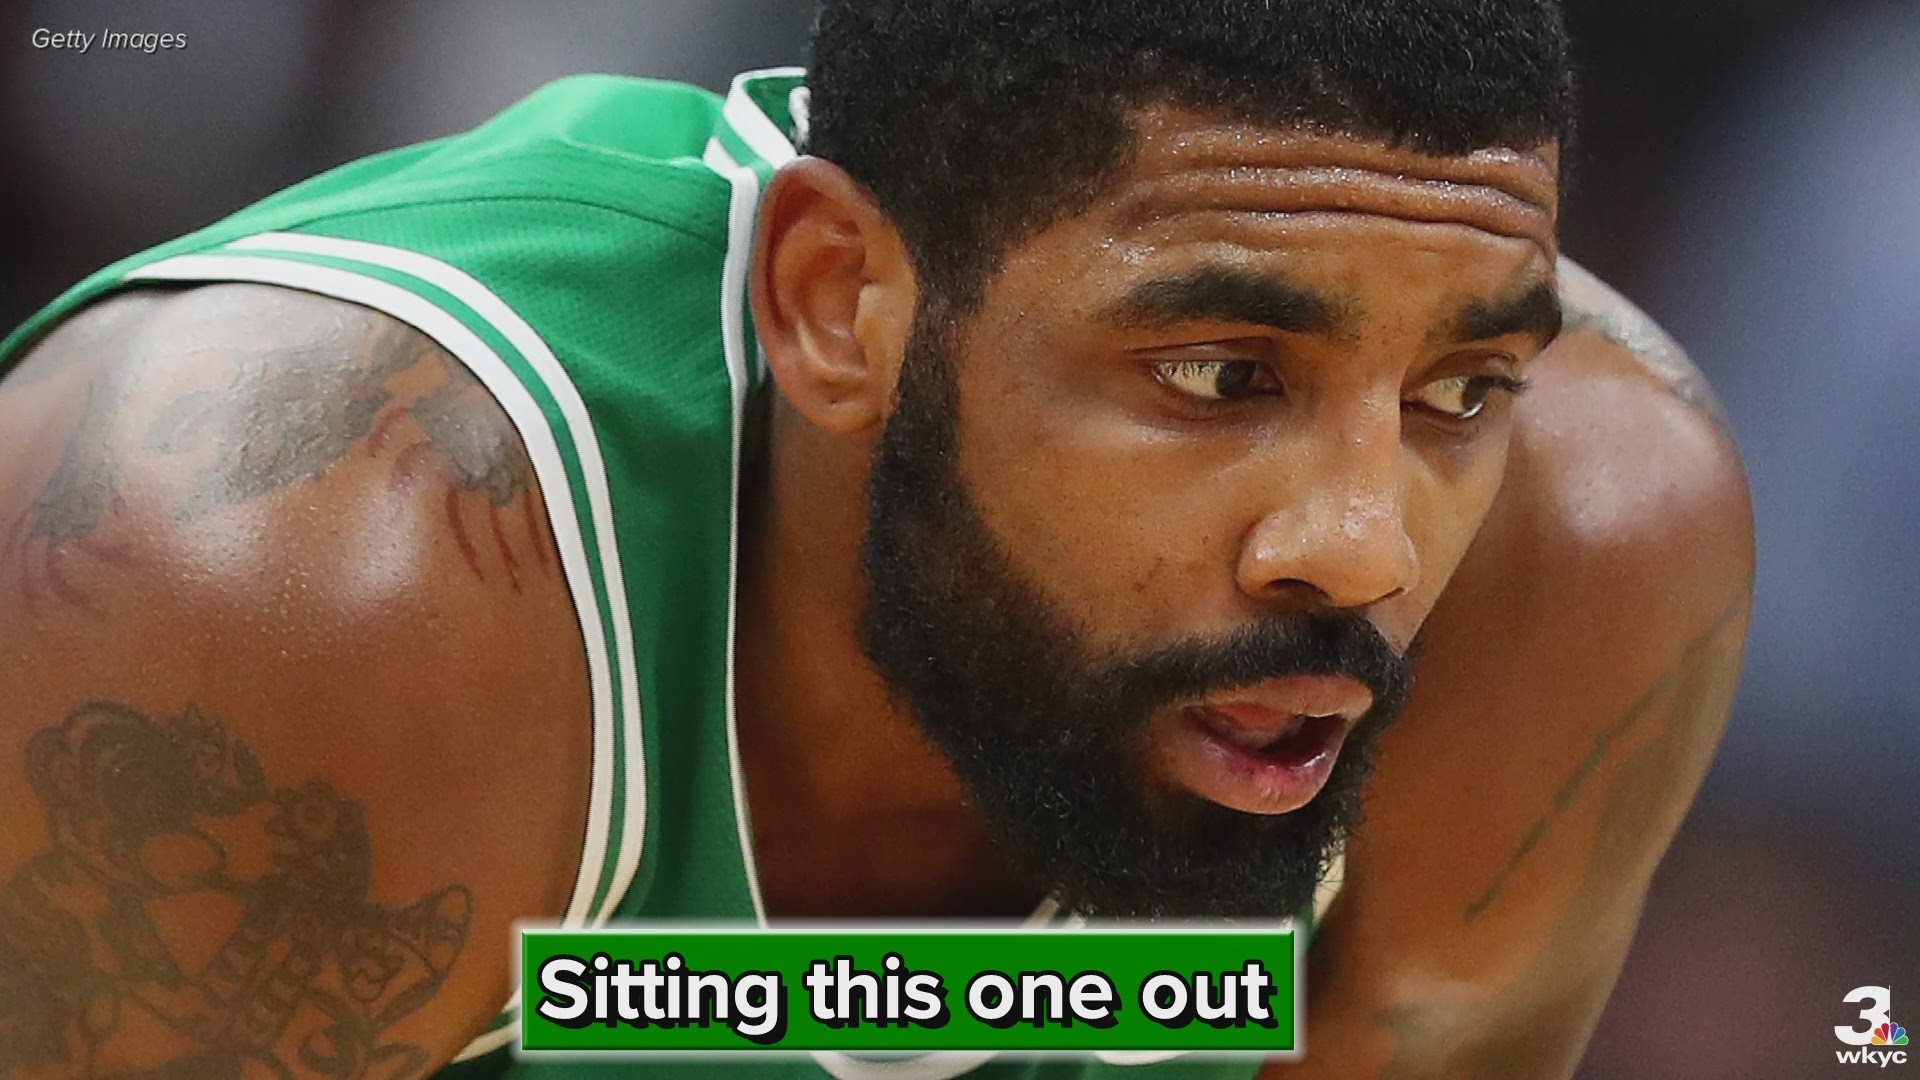 According to the Boston Celtics, Kyrie Irving will miss the team's Wednesday matchup against the Cleveland Cavaliers due to the flu.